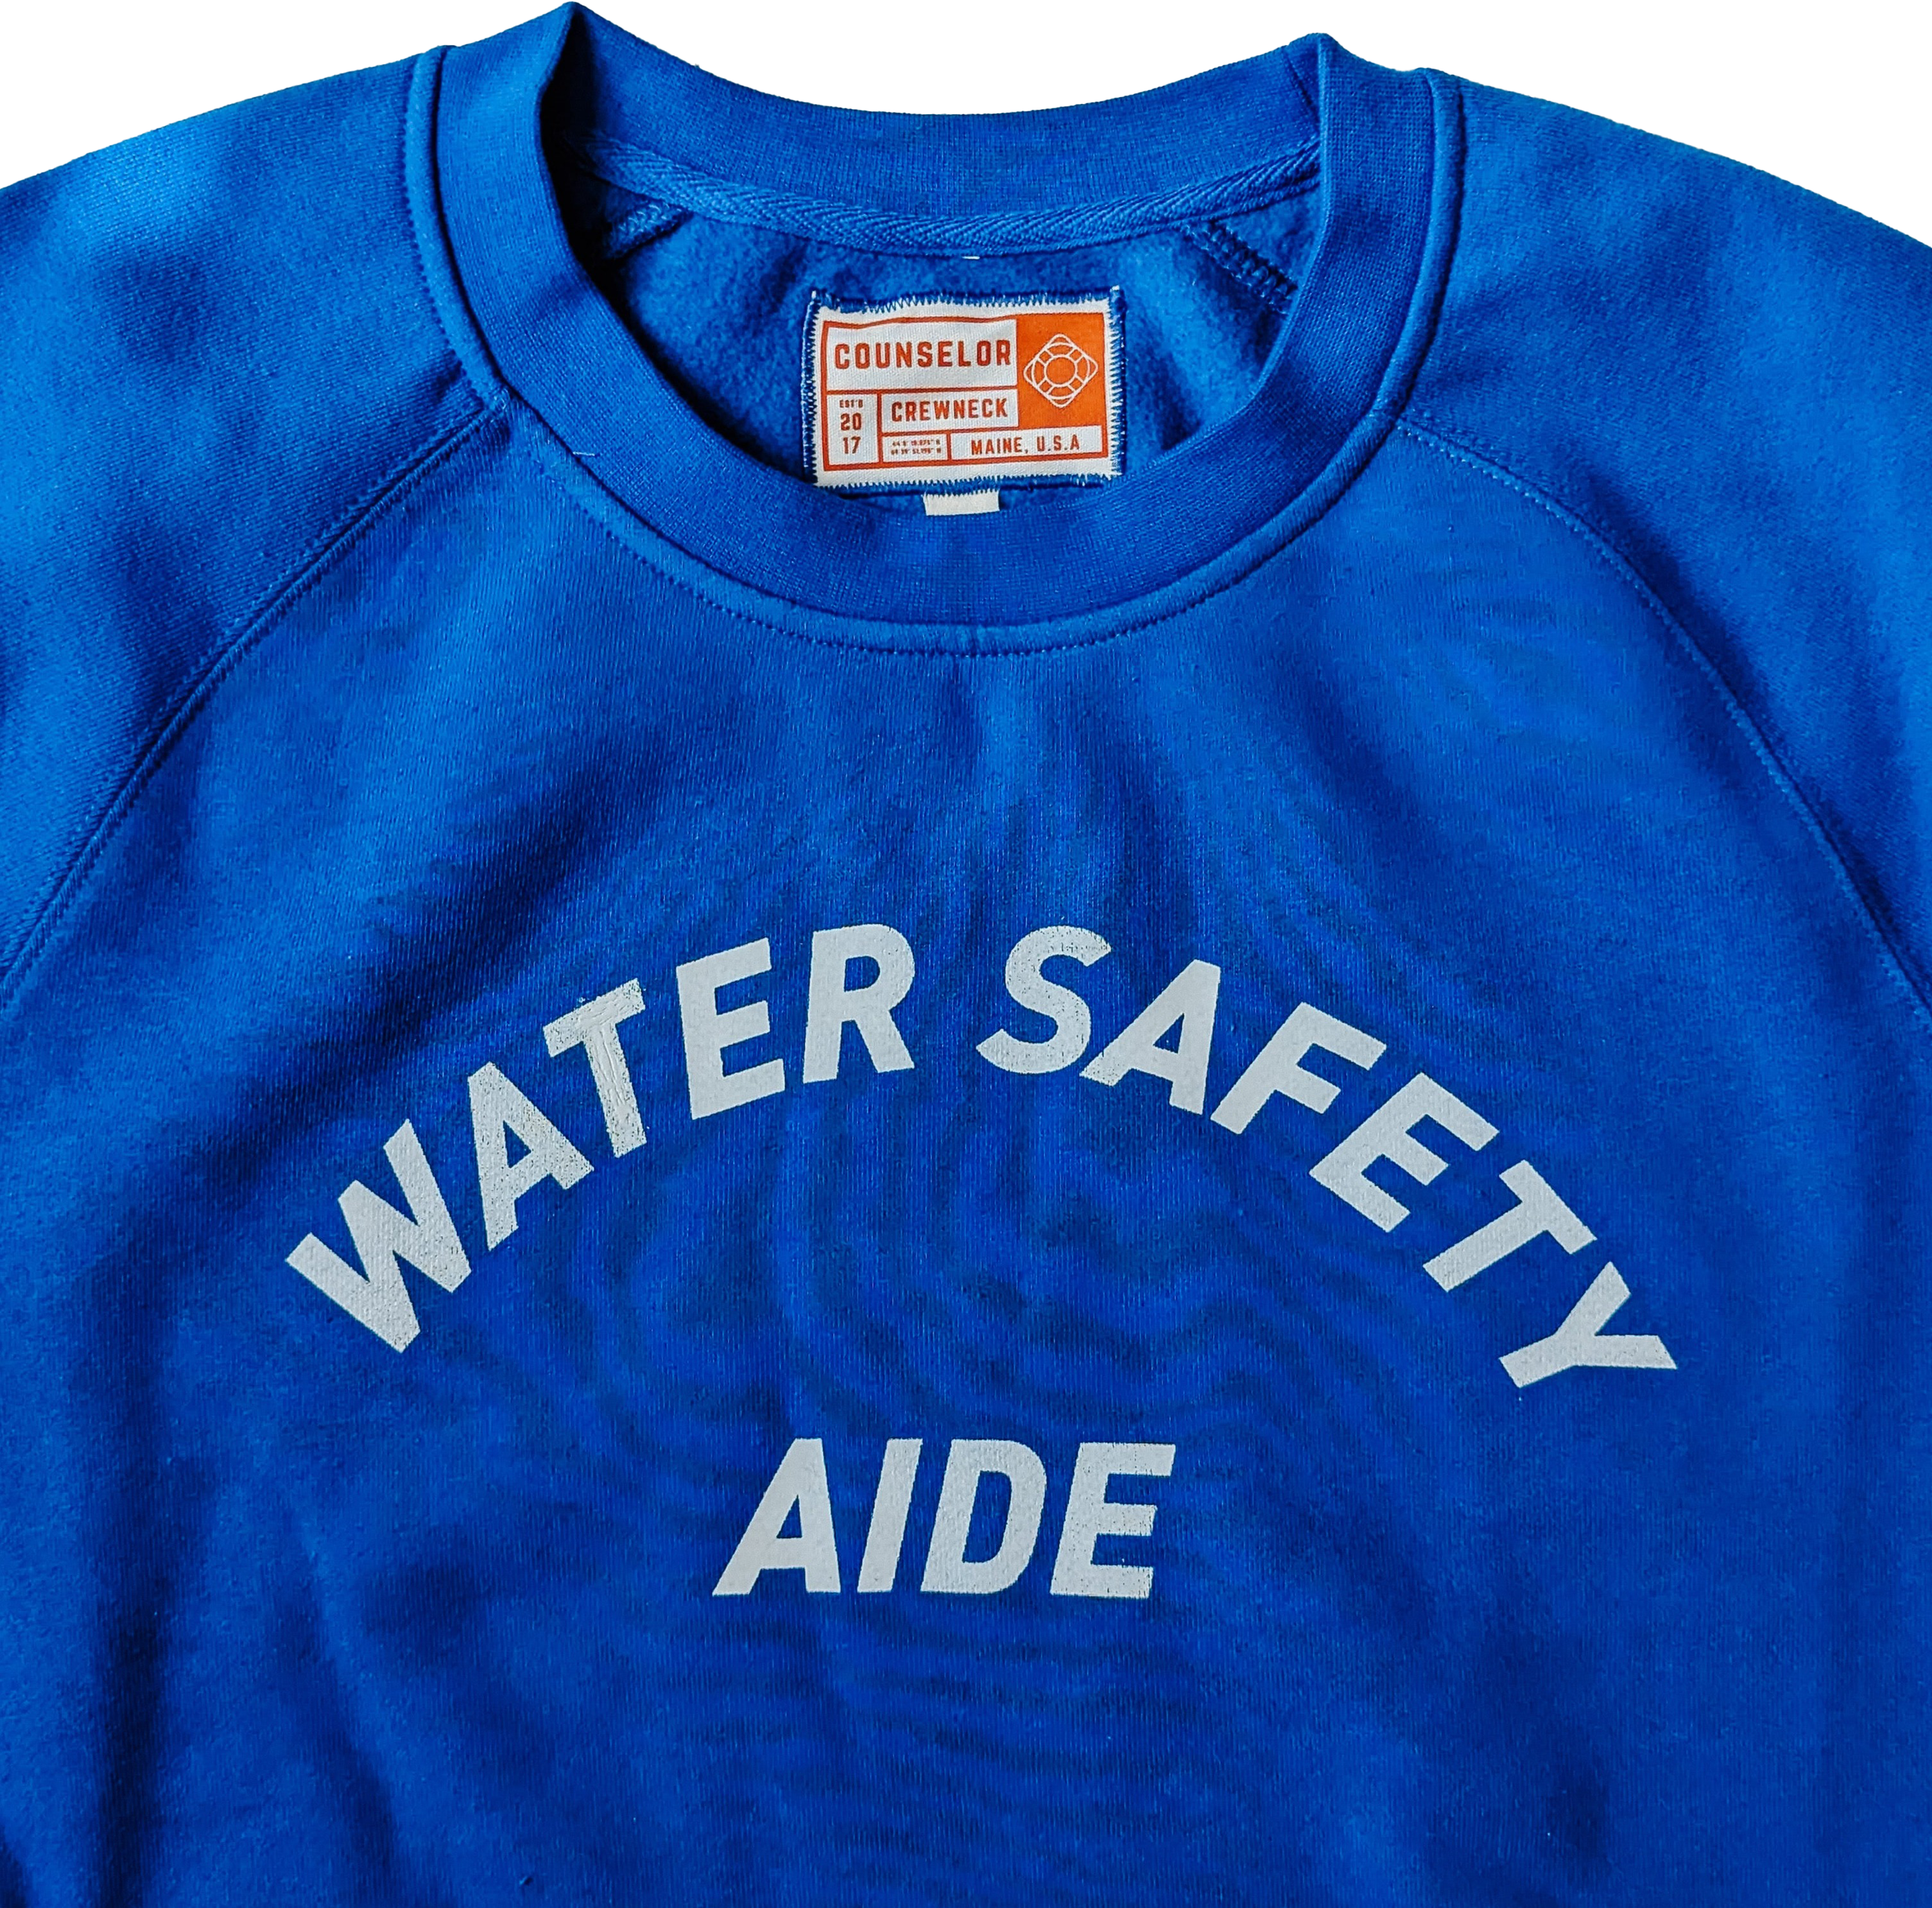 Water Safety Aide | Royal